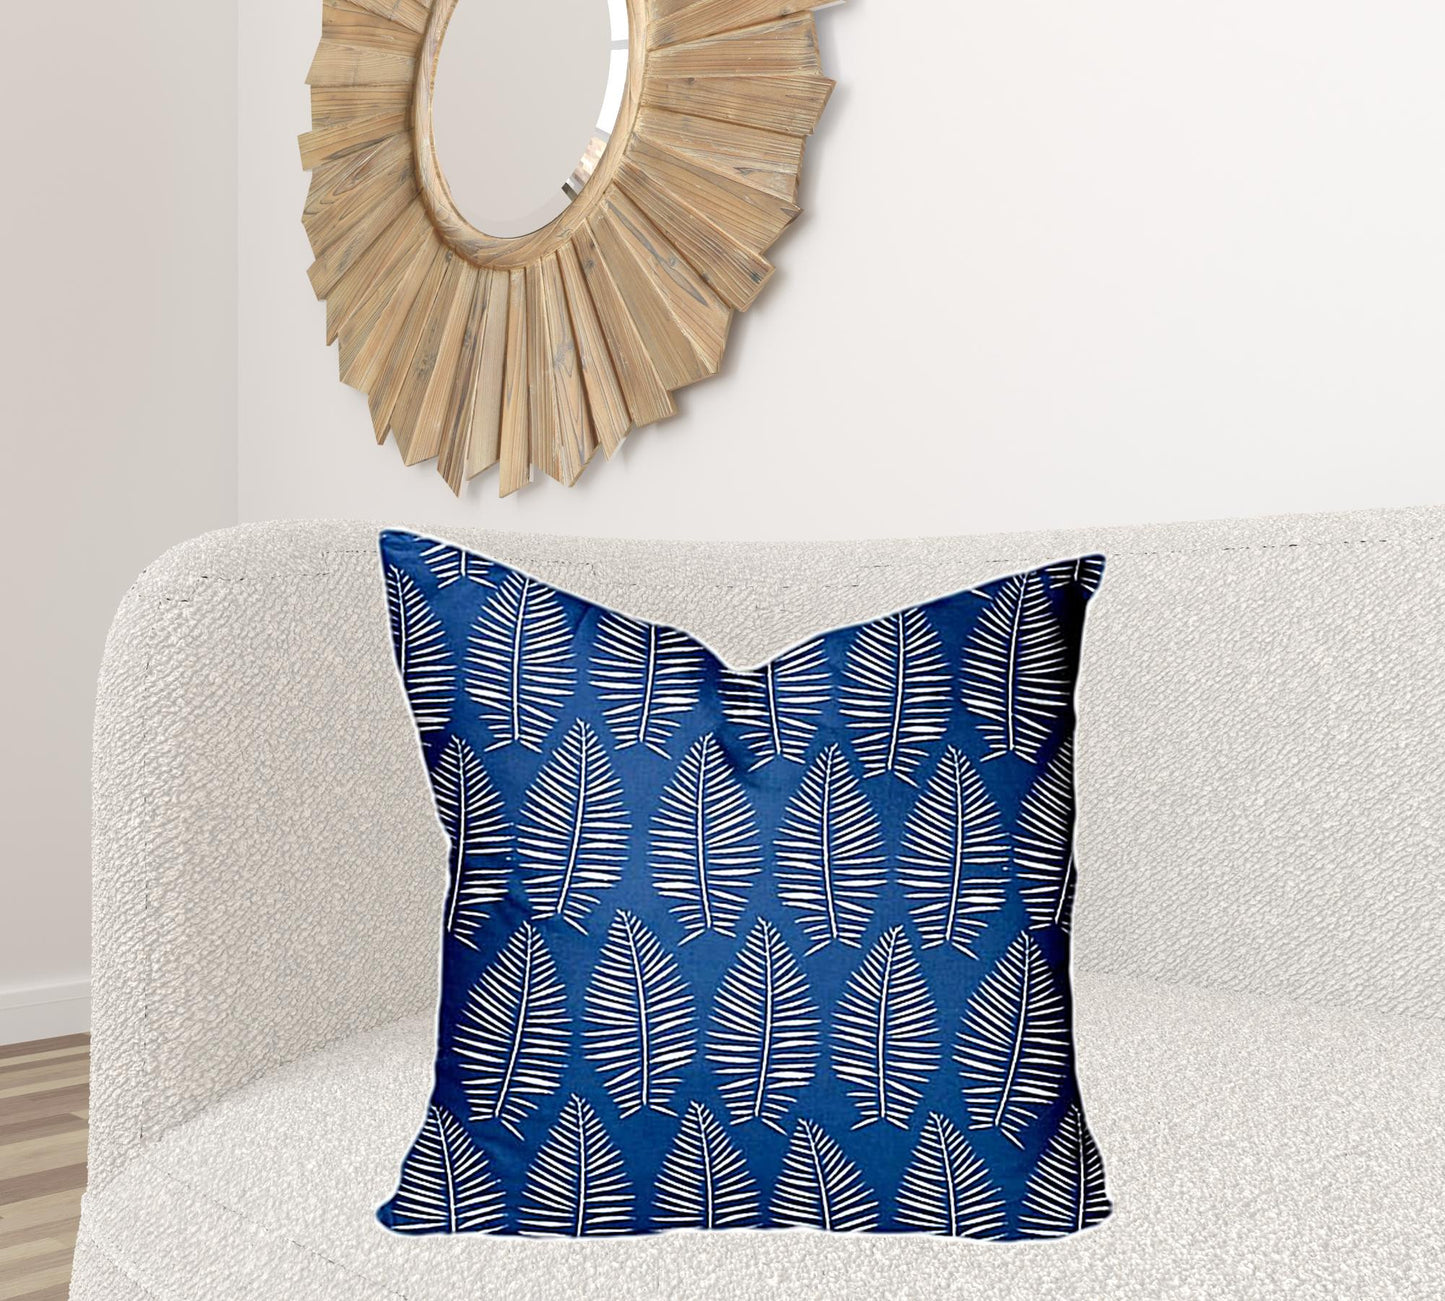 26" X 26" Blue And White Enveloped Tropical Throw Indoor Outdoor Pillow